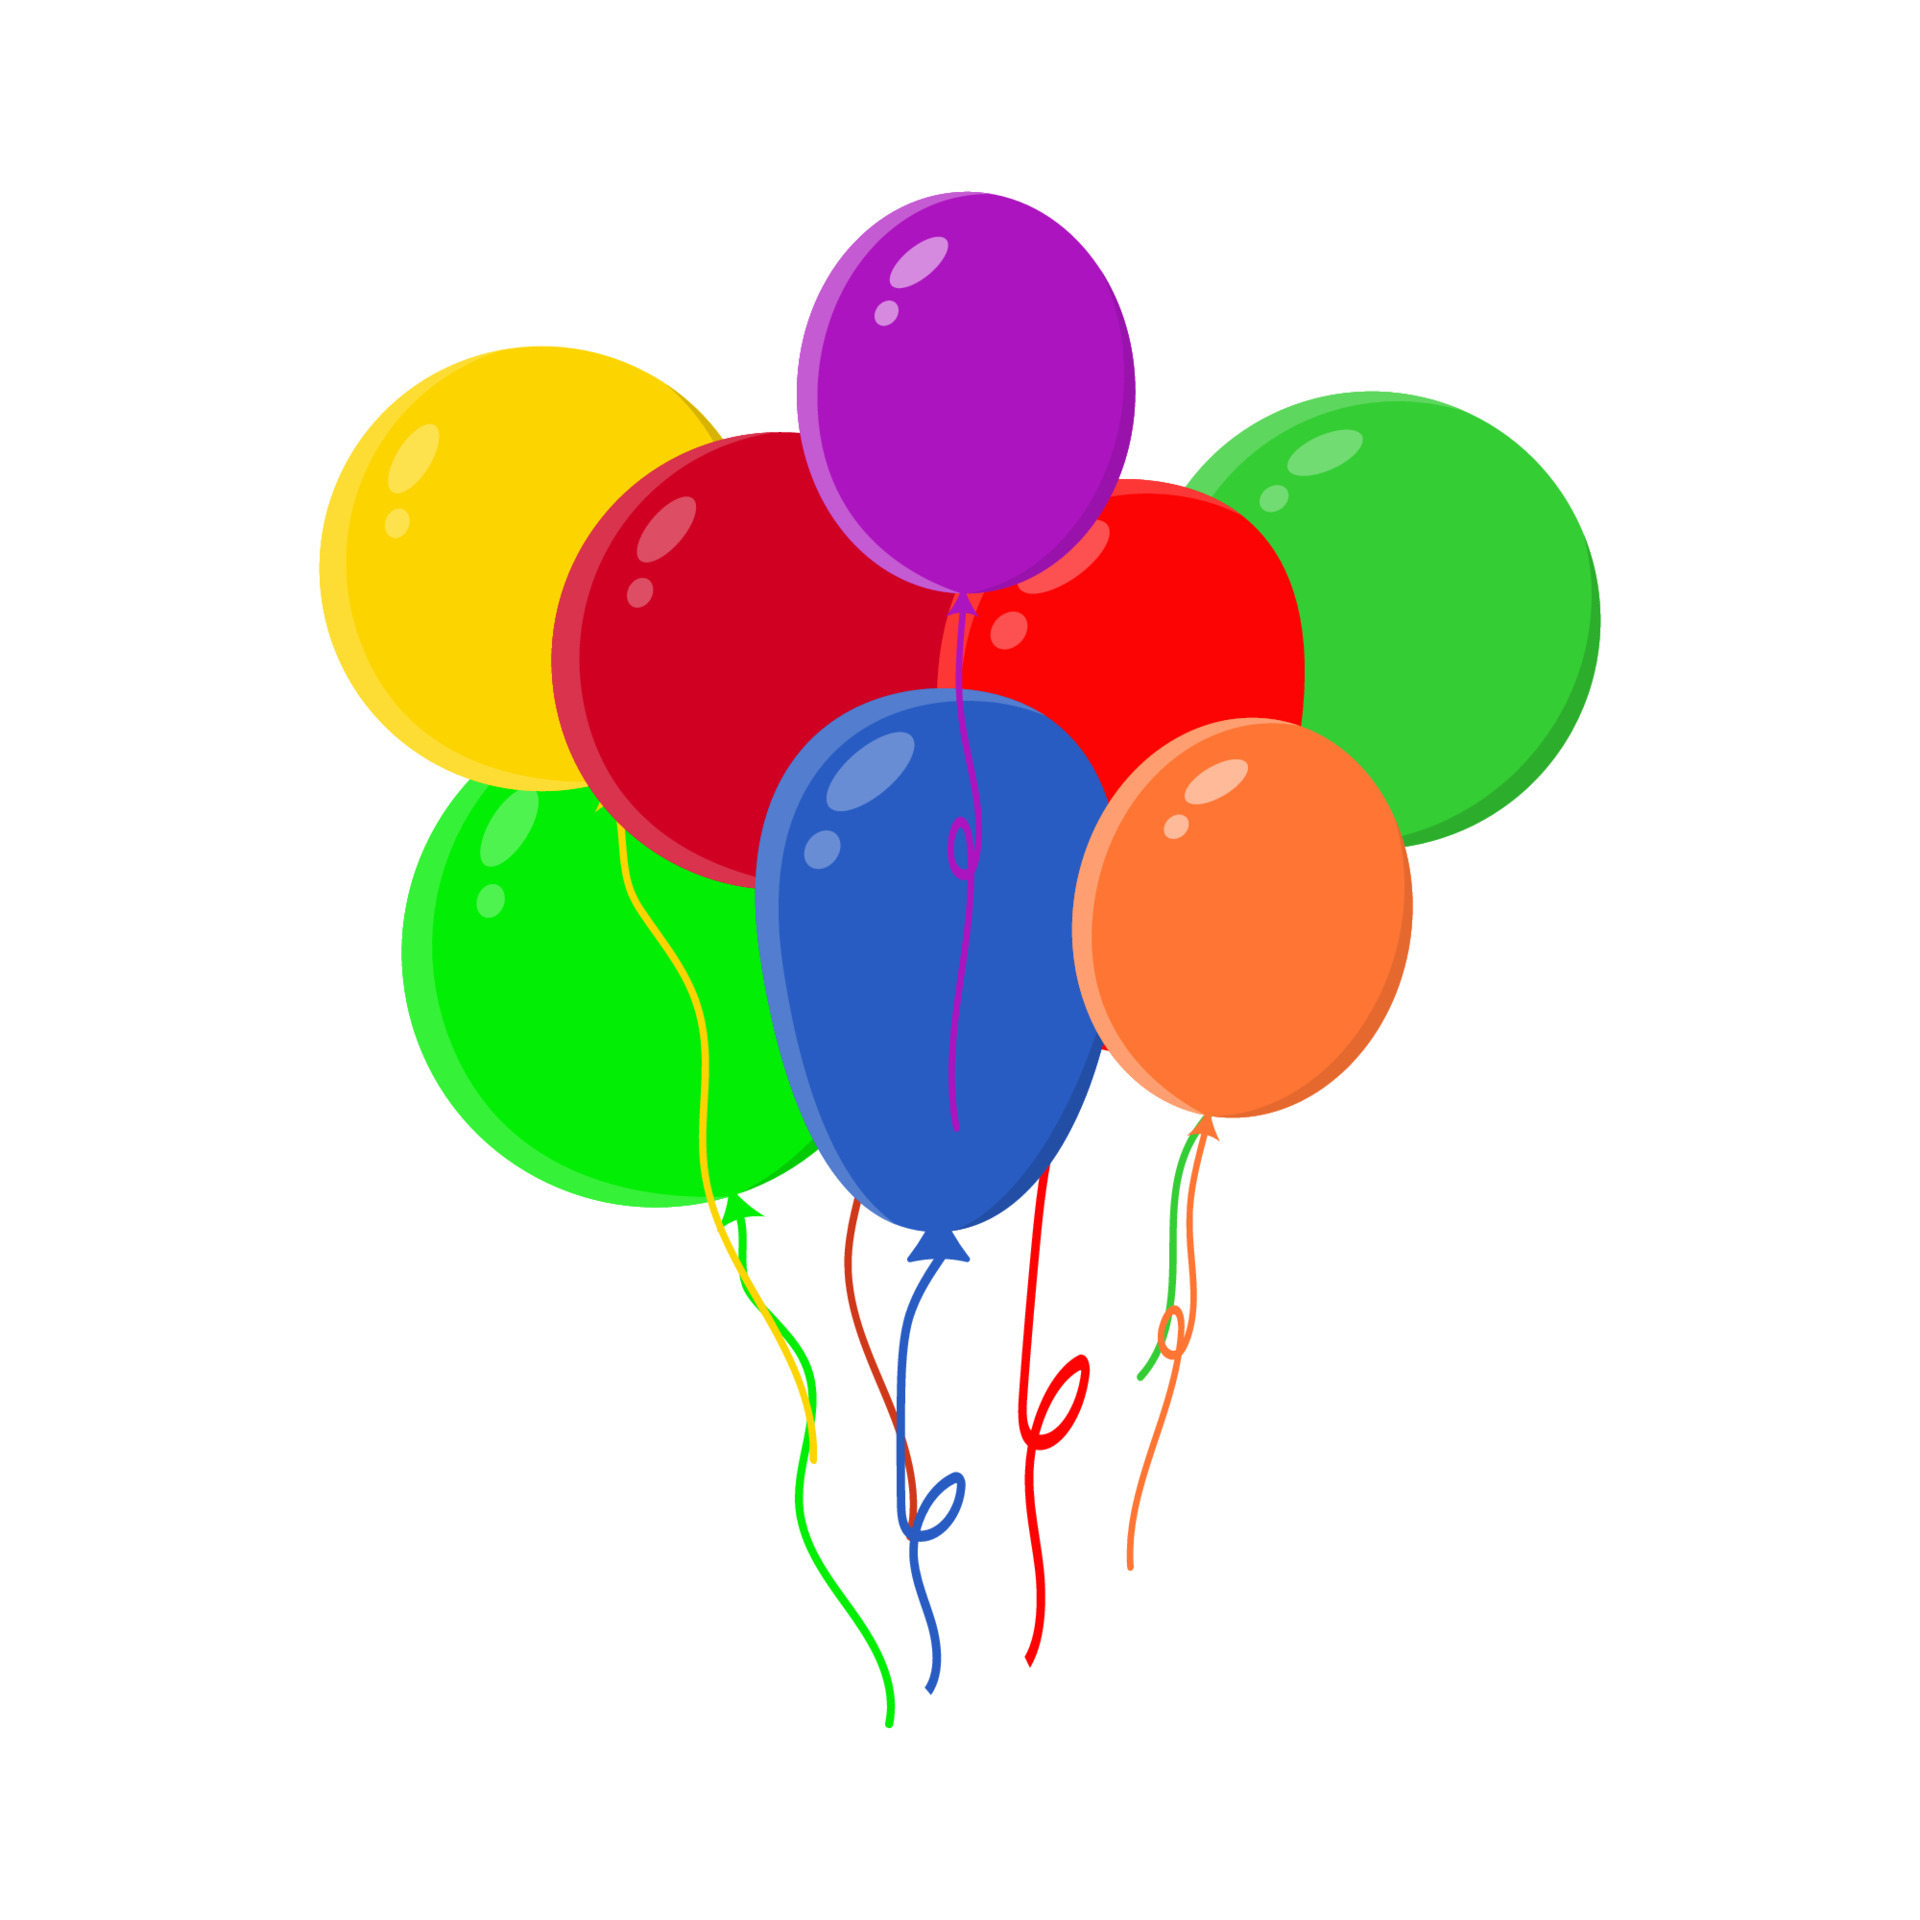 https://static.vecteezy.com/system/resources/previews/013/709/677/original/color-rubber-flying-cartoon-balloons-with-string-set-isolated-on-white-ballons-stock-illustration-vector.jpg